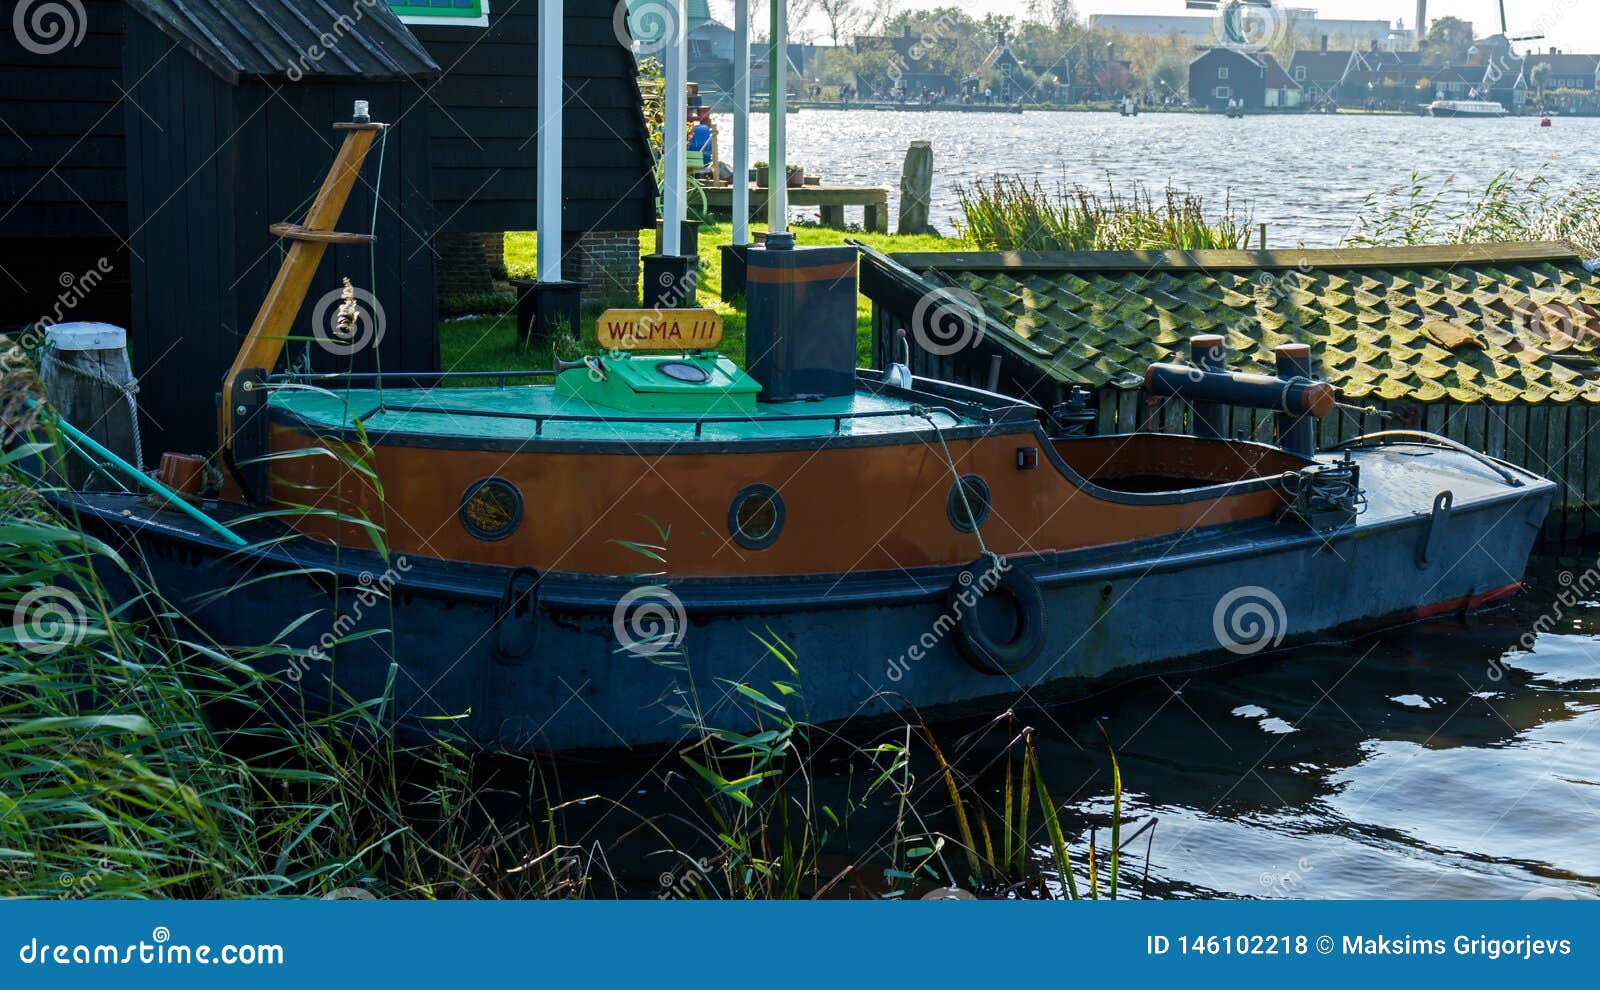 Vintage Fishing Boat In Harbor In Holland, The Netherlands Stock Photo